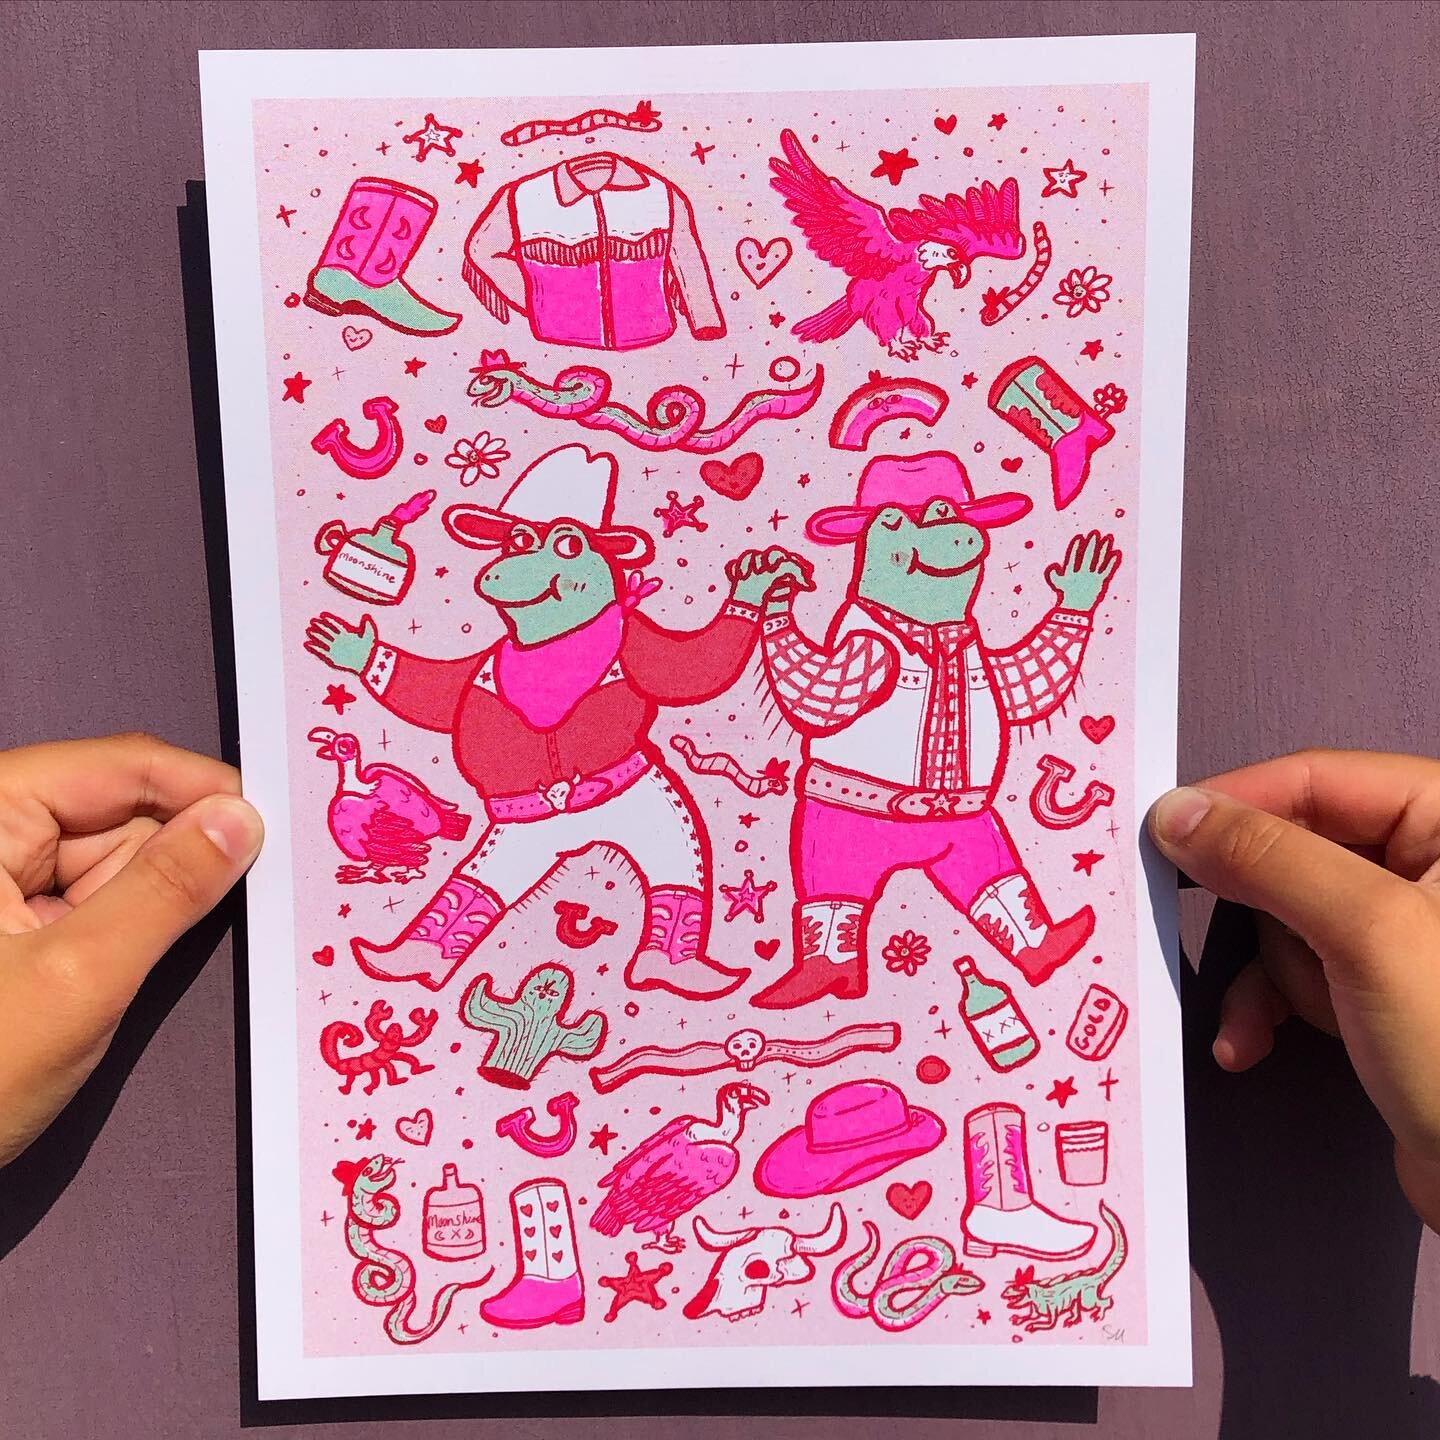 🐸FROGGY COWBOY PRINT🐸
What&rsquo;s that? Oh yes, we have a new risograph print in our Frogs in Love series! We have given our frogs a Wild West makeover, and don&rsquo;t they look cute? 😍 this what a somewhat ambitious three colour print (pink, re